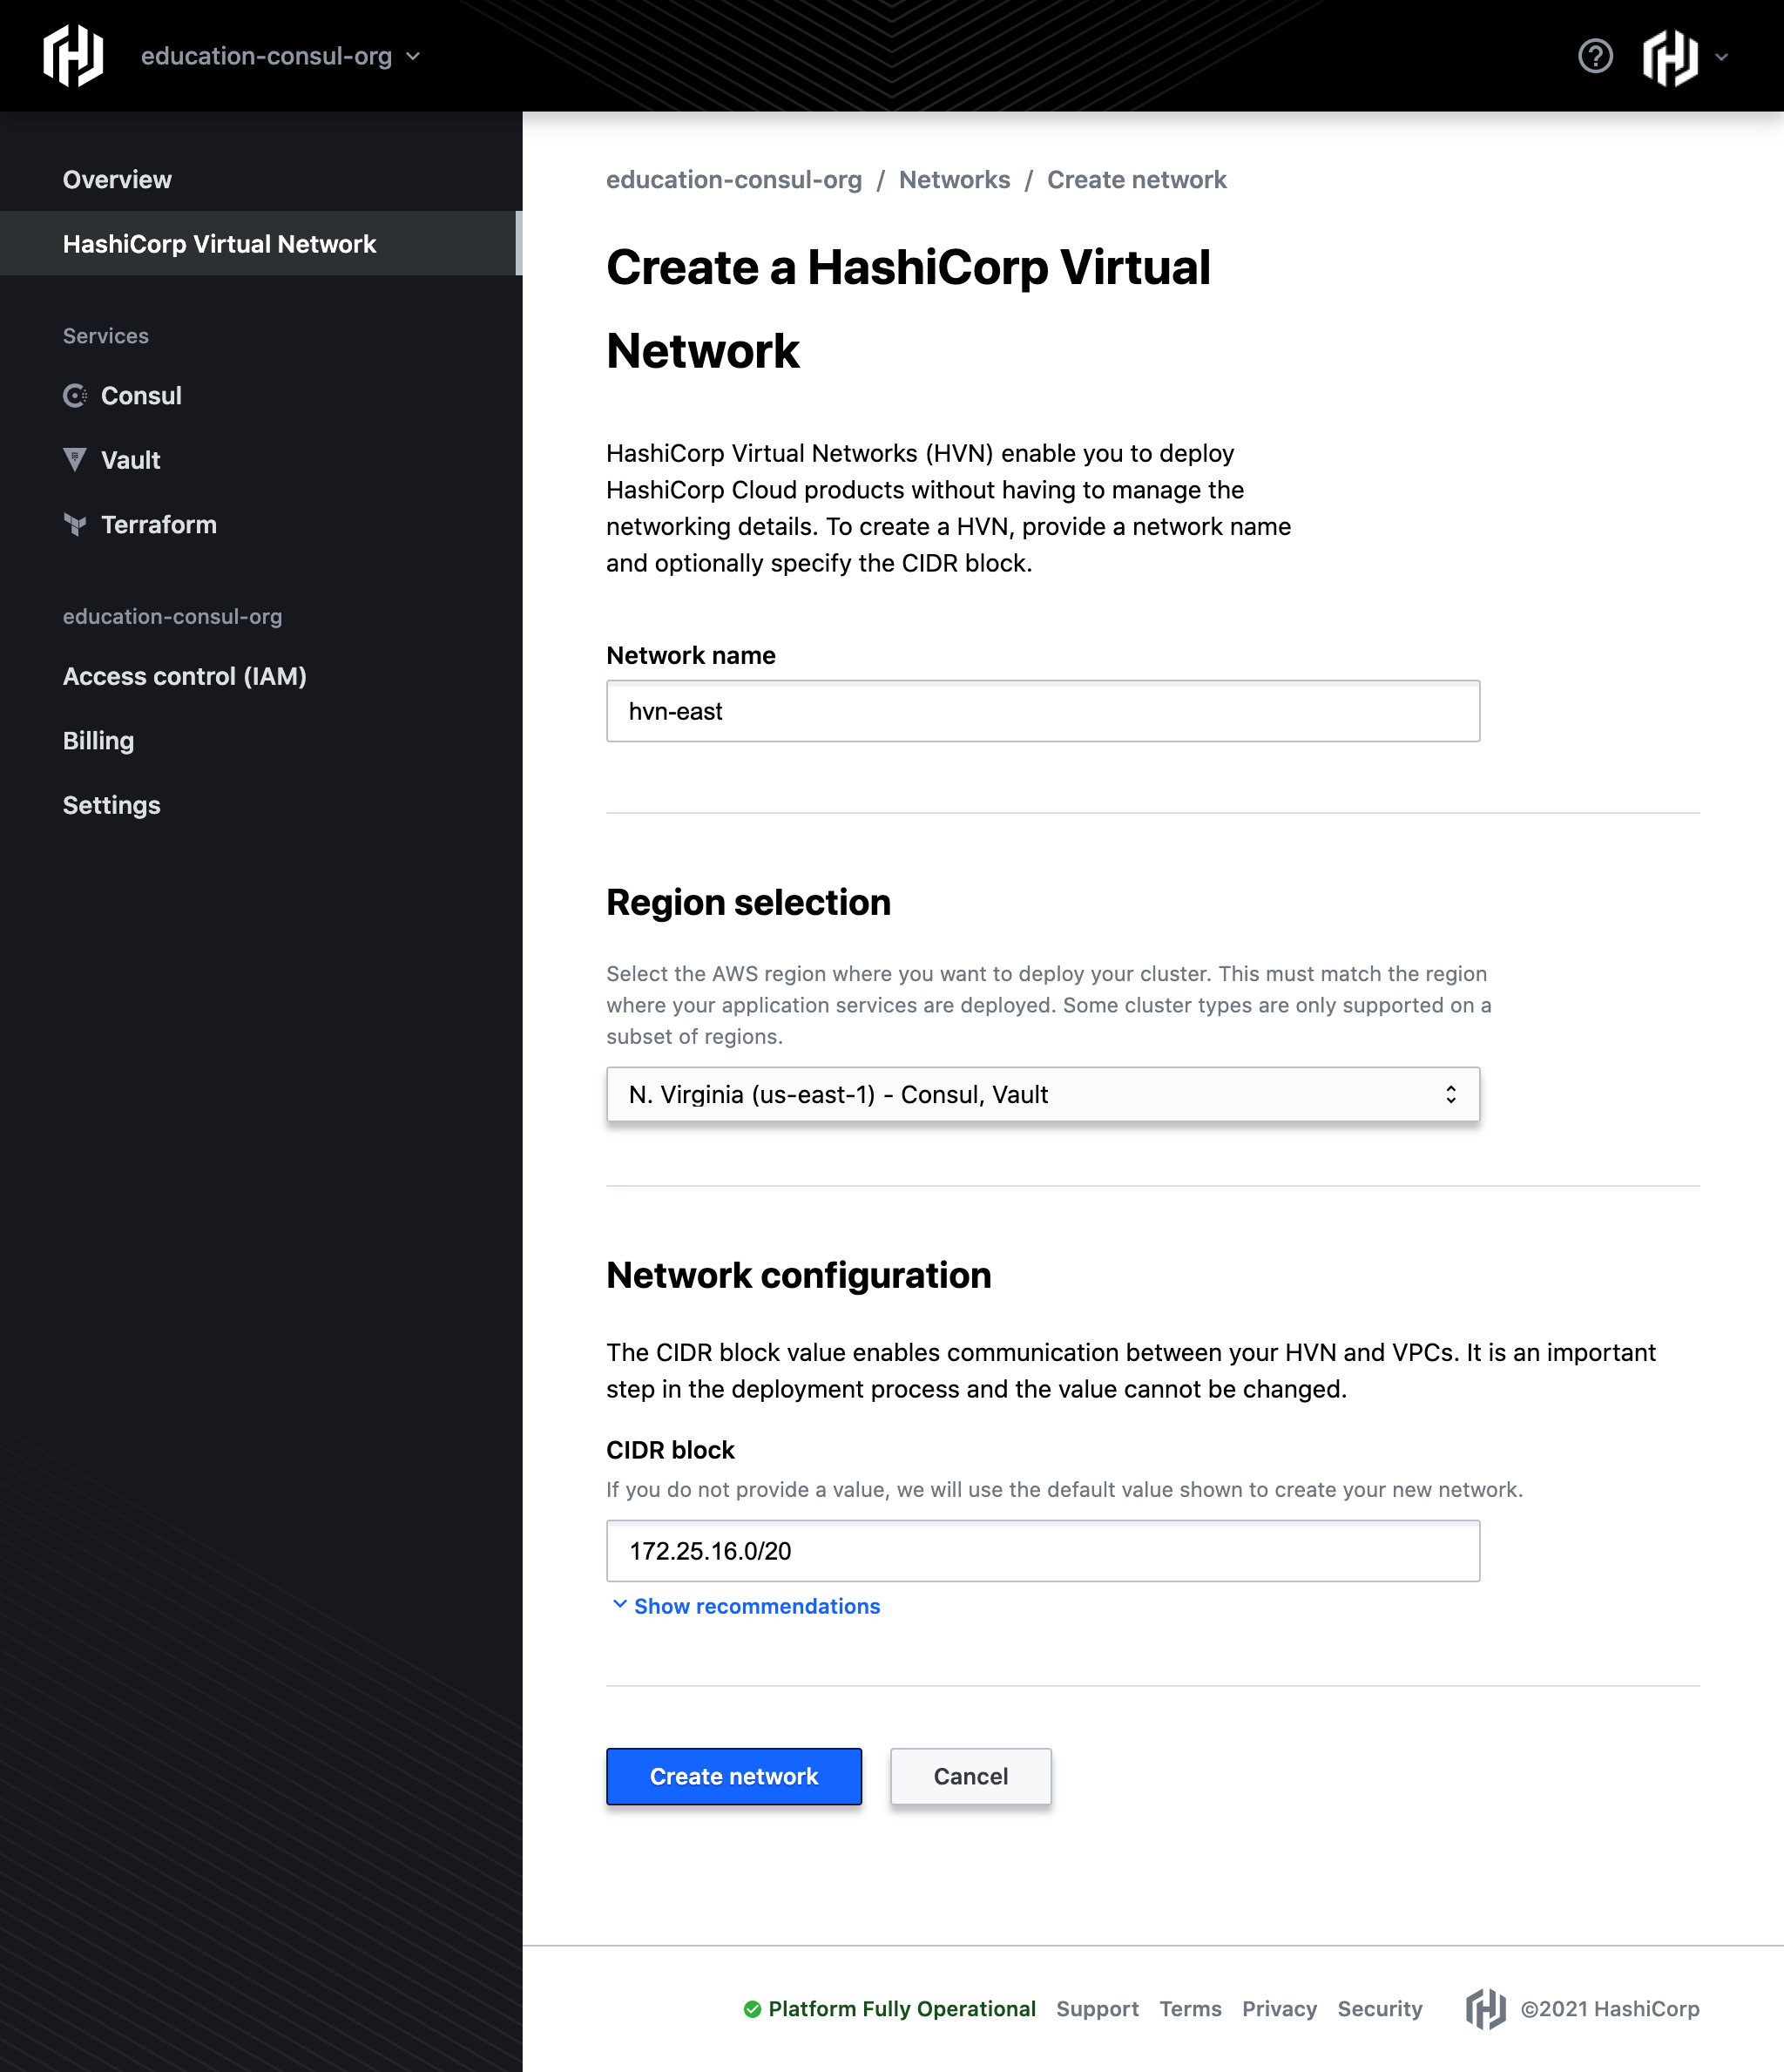 The HVN creation page with input fields highlighted